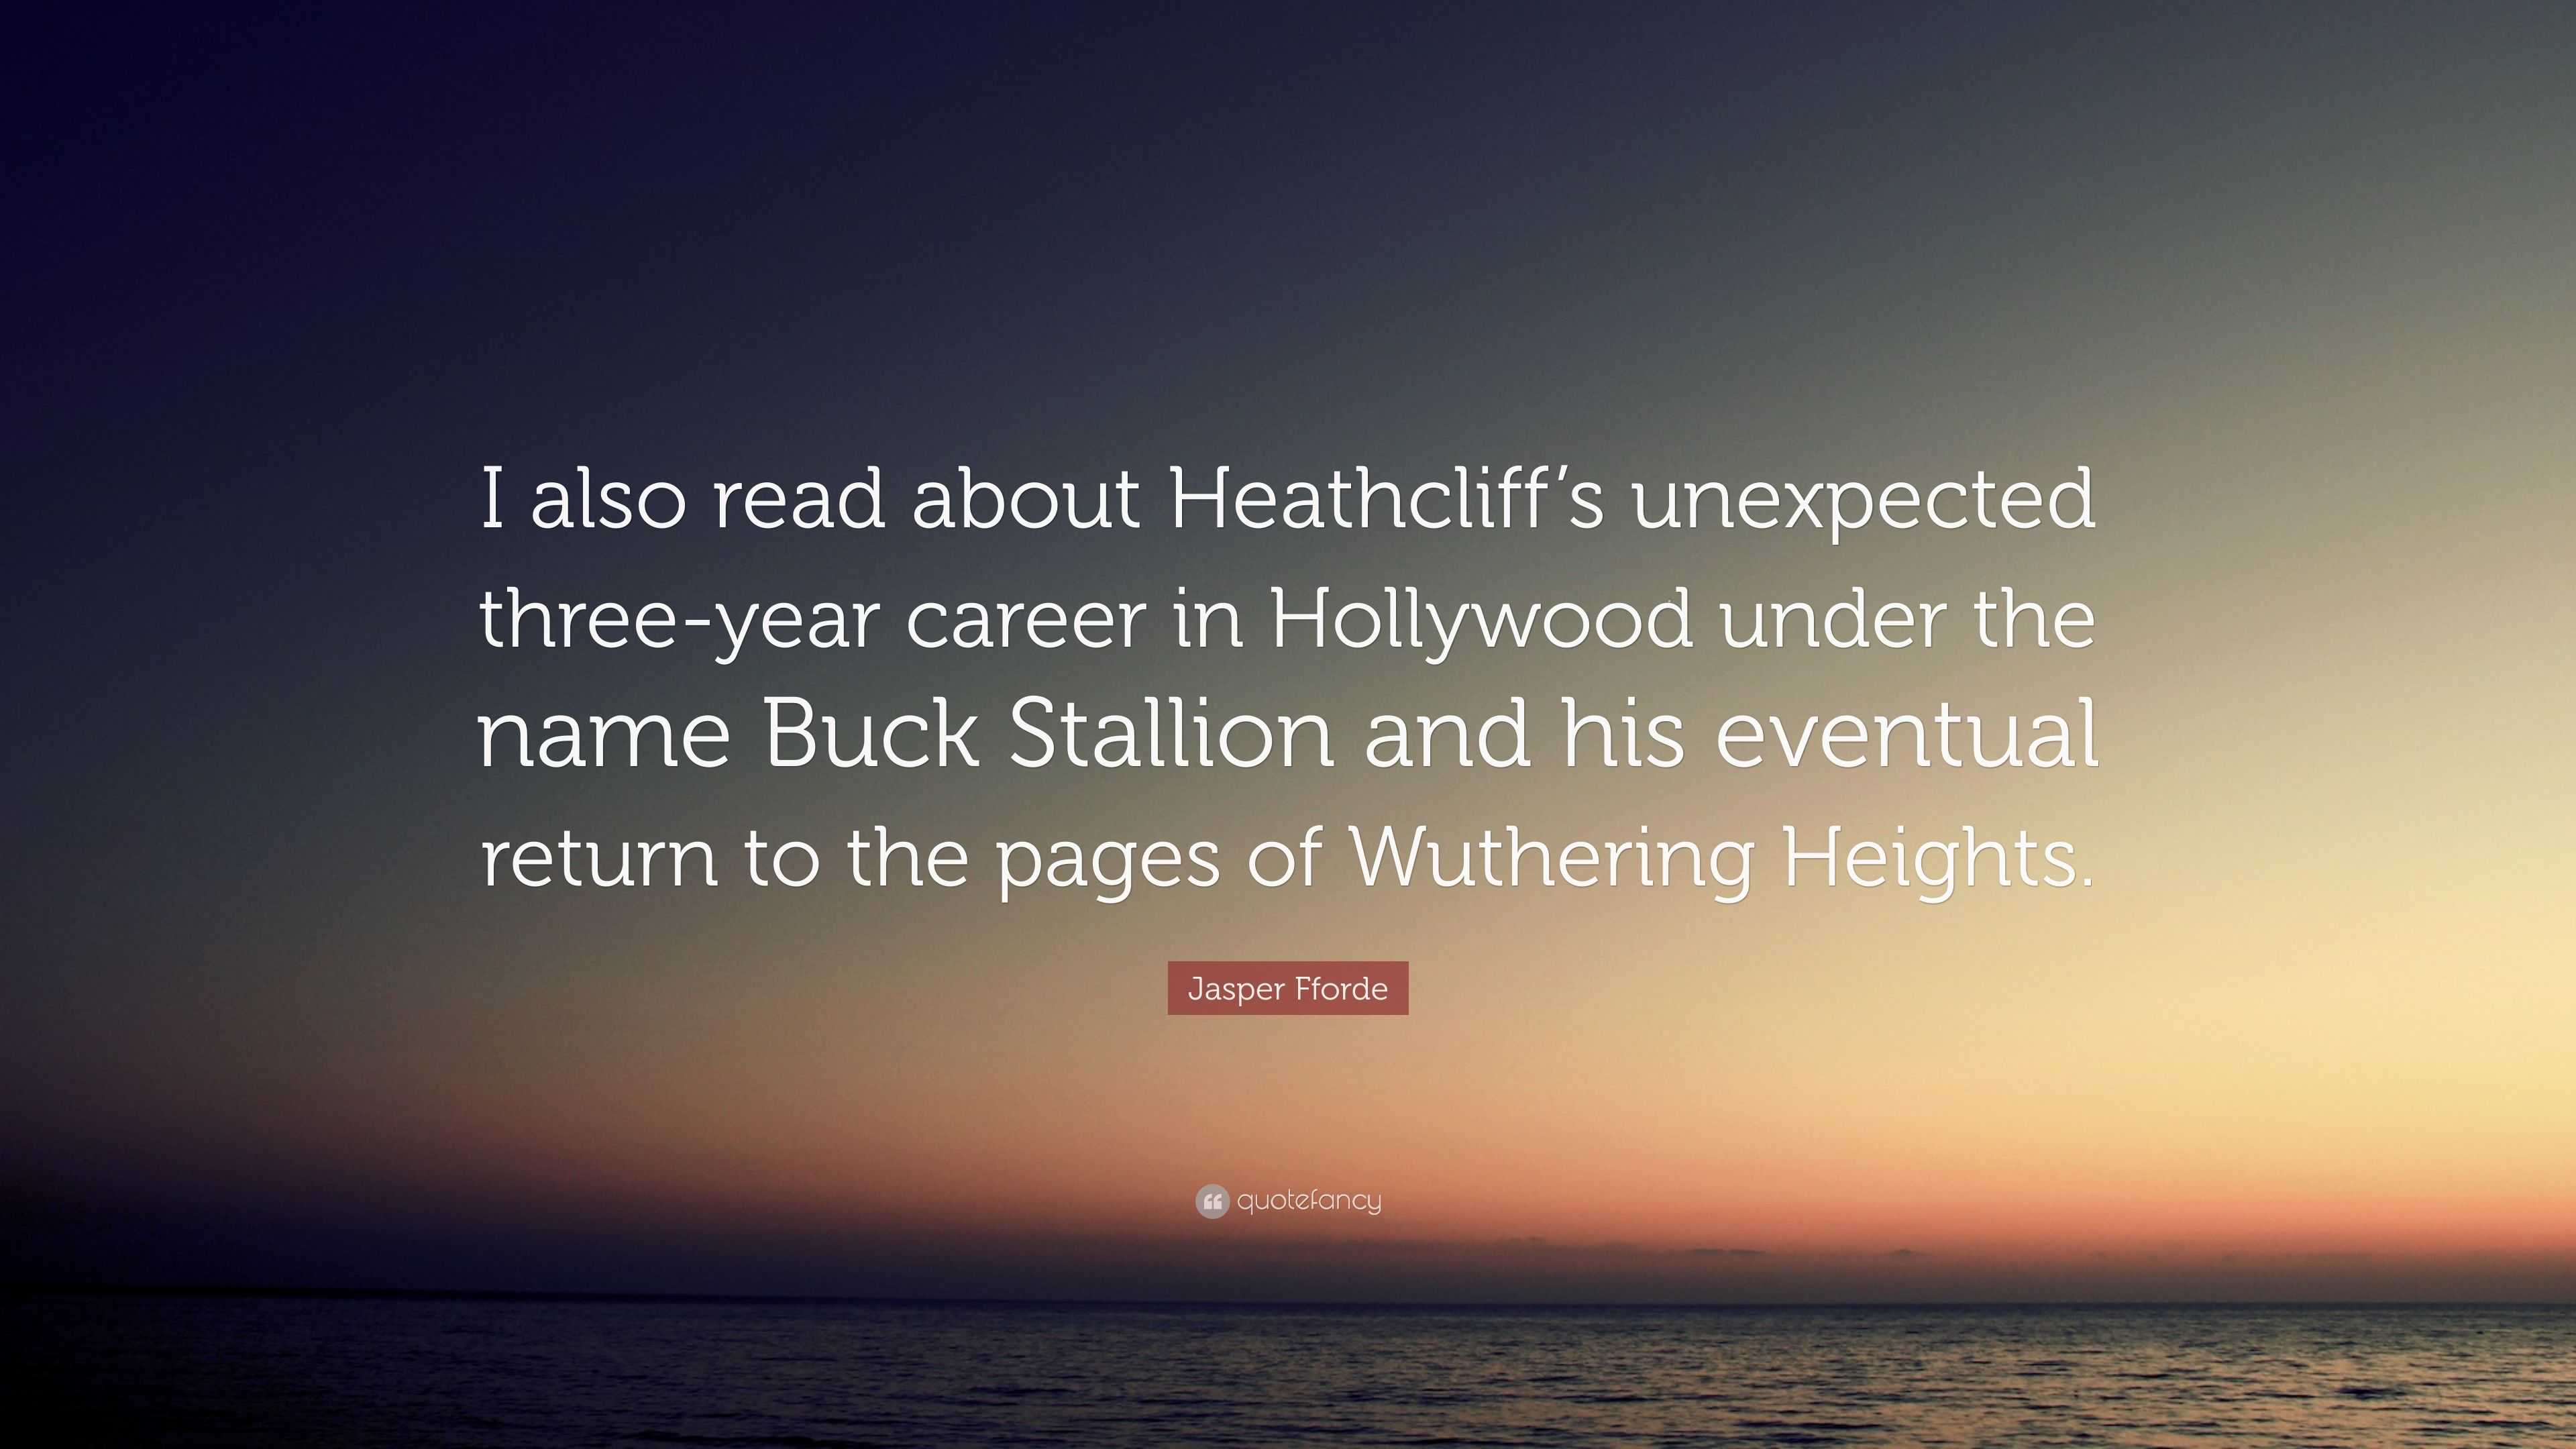 Wuthering heights heathcliff's negative and positive qualities